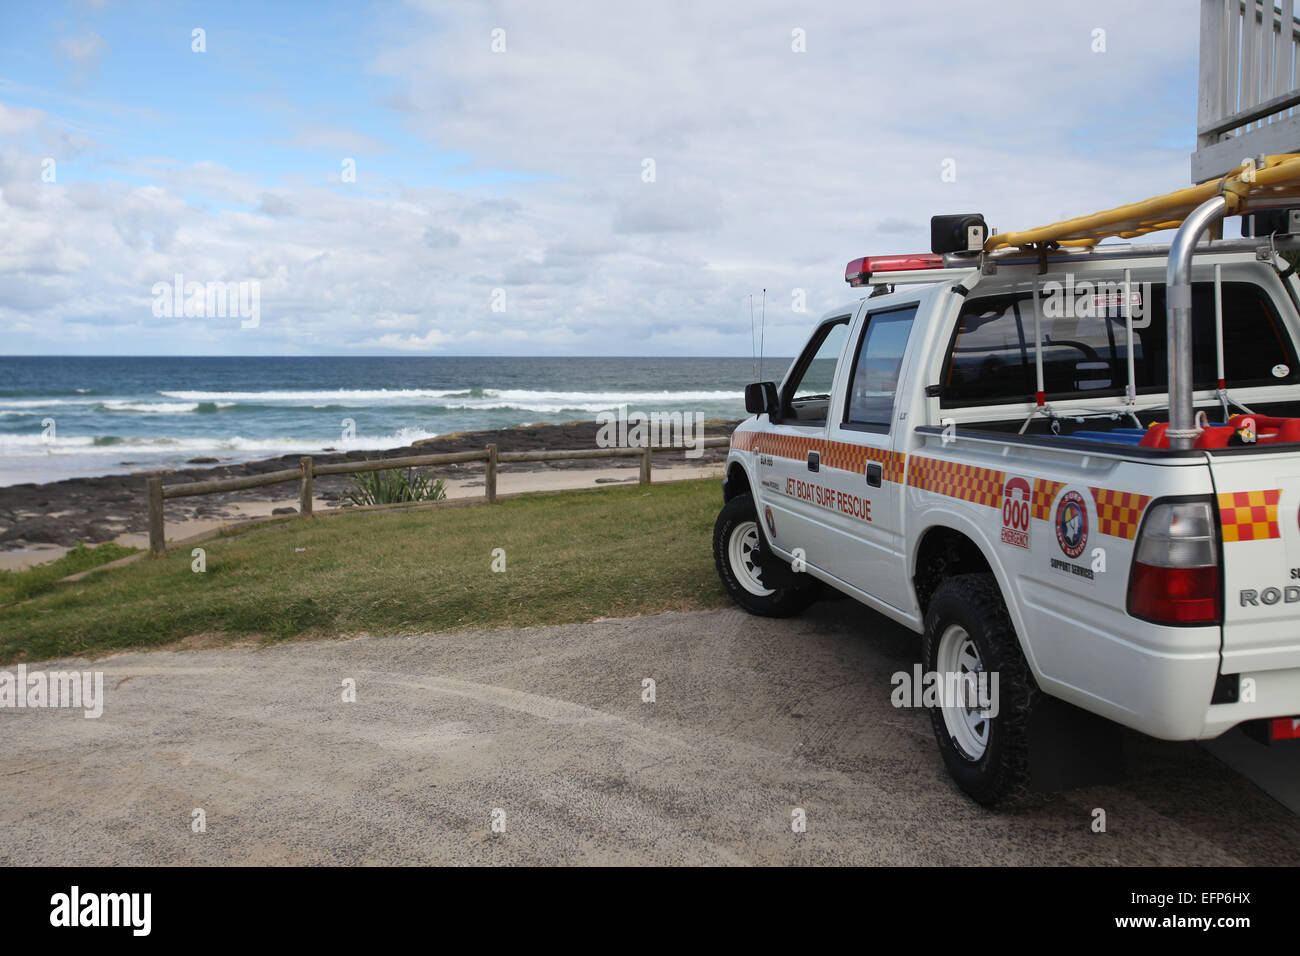 Shelly Beach, Ballina, NSW, Australia. 9th February, 2015. Tadashi Nakahara, 41 has died following a shark attack at Shelly Beach, Ballina, NSW. It is reported the 'large' shark attacked from behind and bite off both the mans legs. The attack occured at approx 945am local time. Ballina is located 30km South of Byron Bay on the far north coast of NSW. Beaches in the area have been closed. Credit:  Ben Wyeth/Alamy Live News Stock Photo